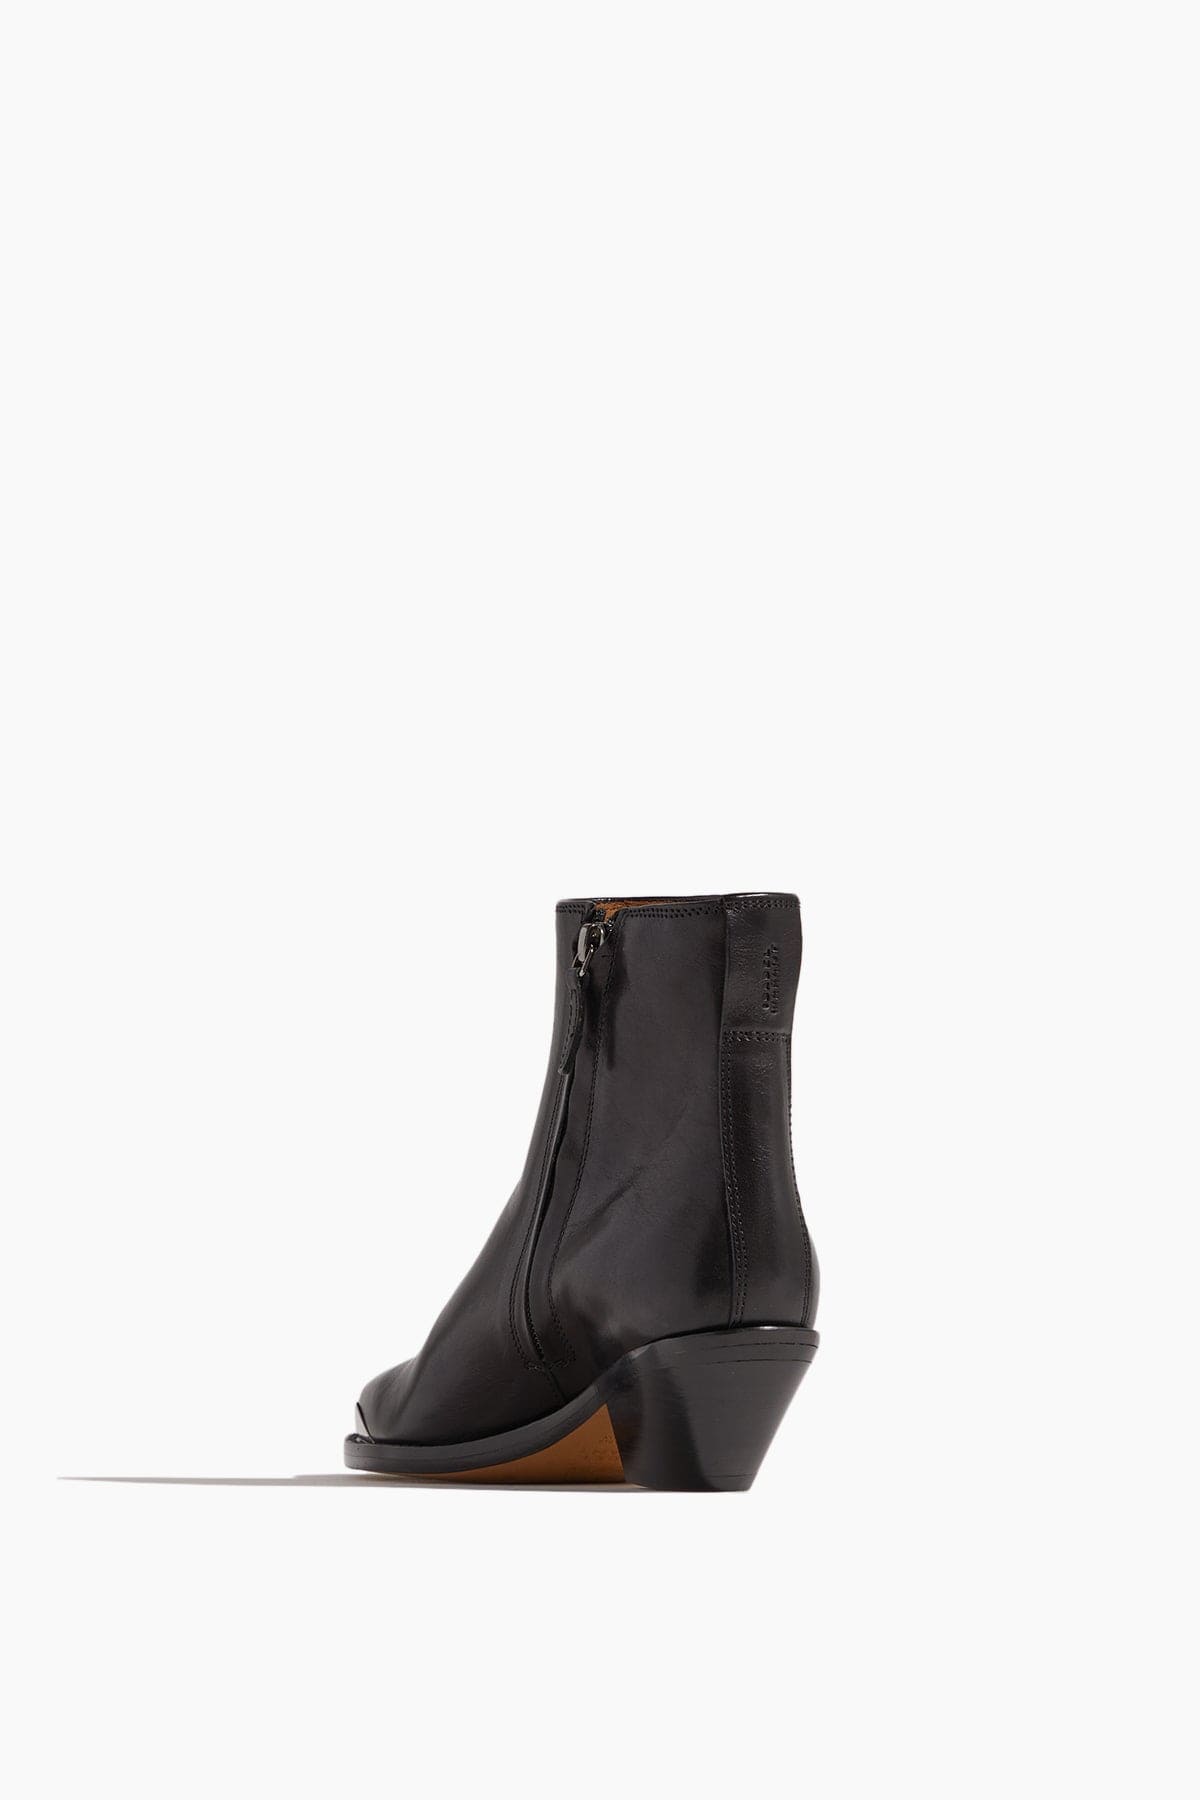 Isabel Marant Shoes Ankle Boots Adnae Boots in Black Isabel Marant Adnae Boots in Black